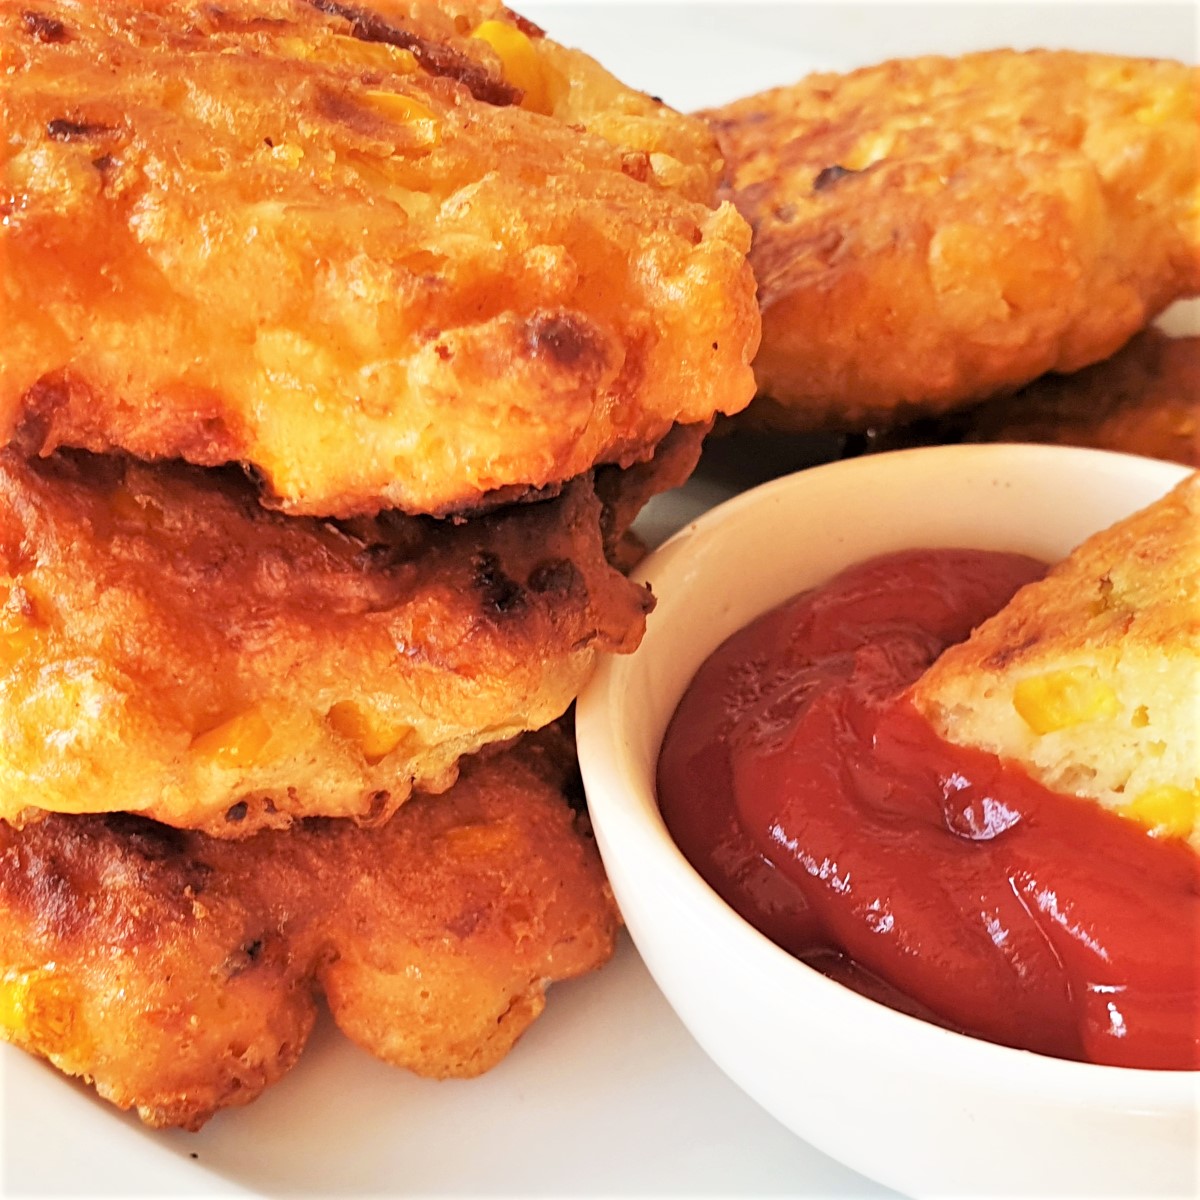 A pile of three fried crispy sweetcorn fritters with a dipping sauce.